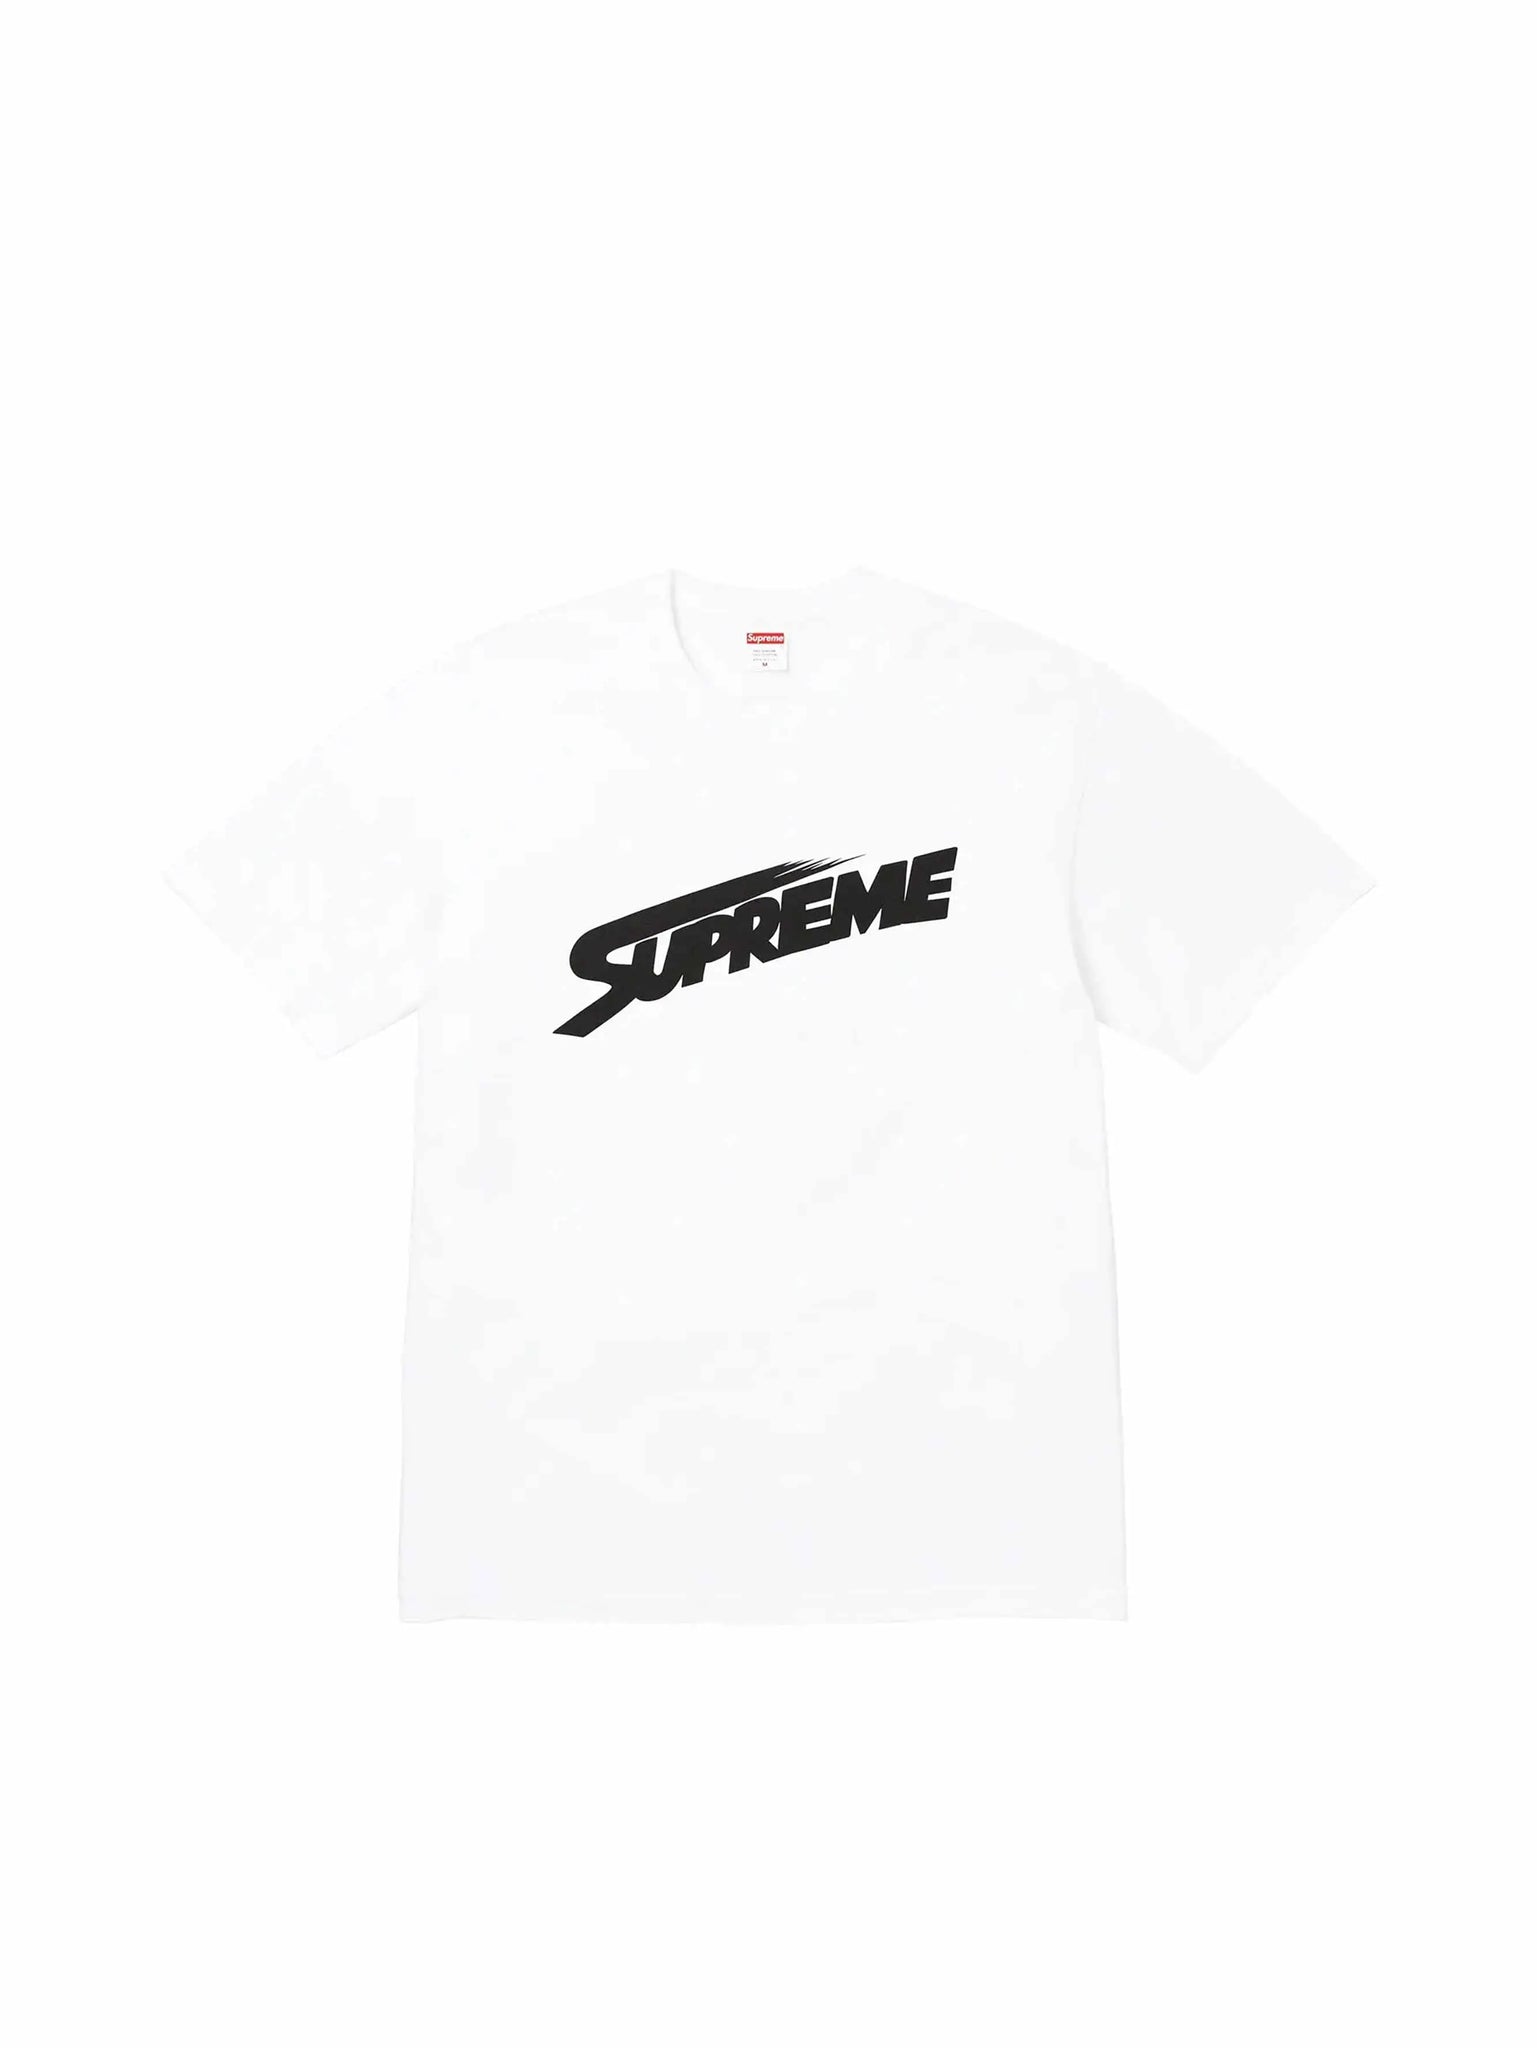 Supreme Mont Blanc Tee White in Auckland, New Zealand - Shop name